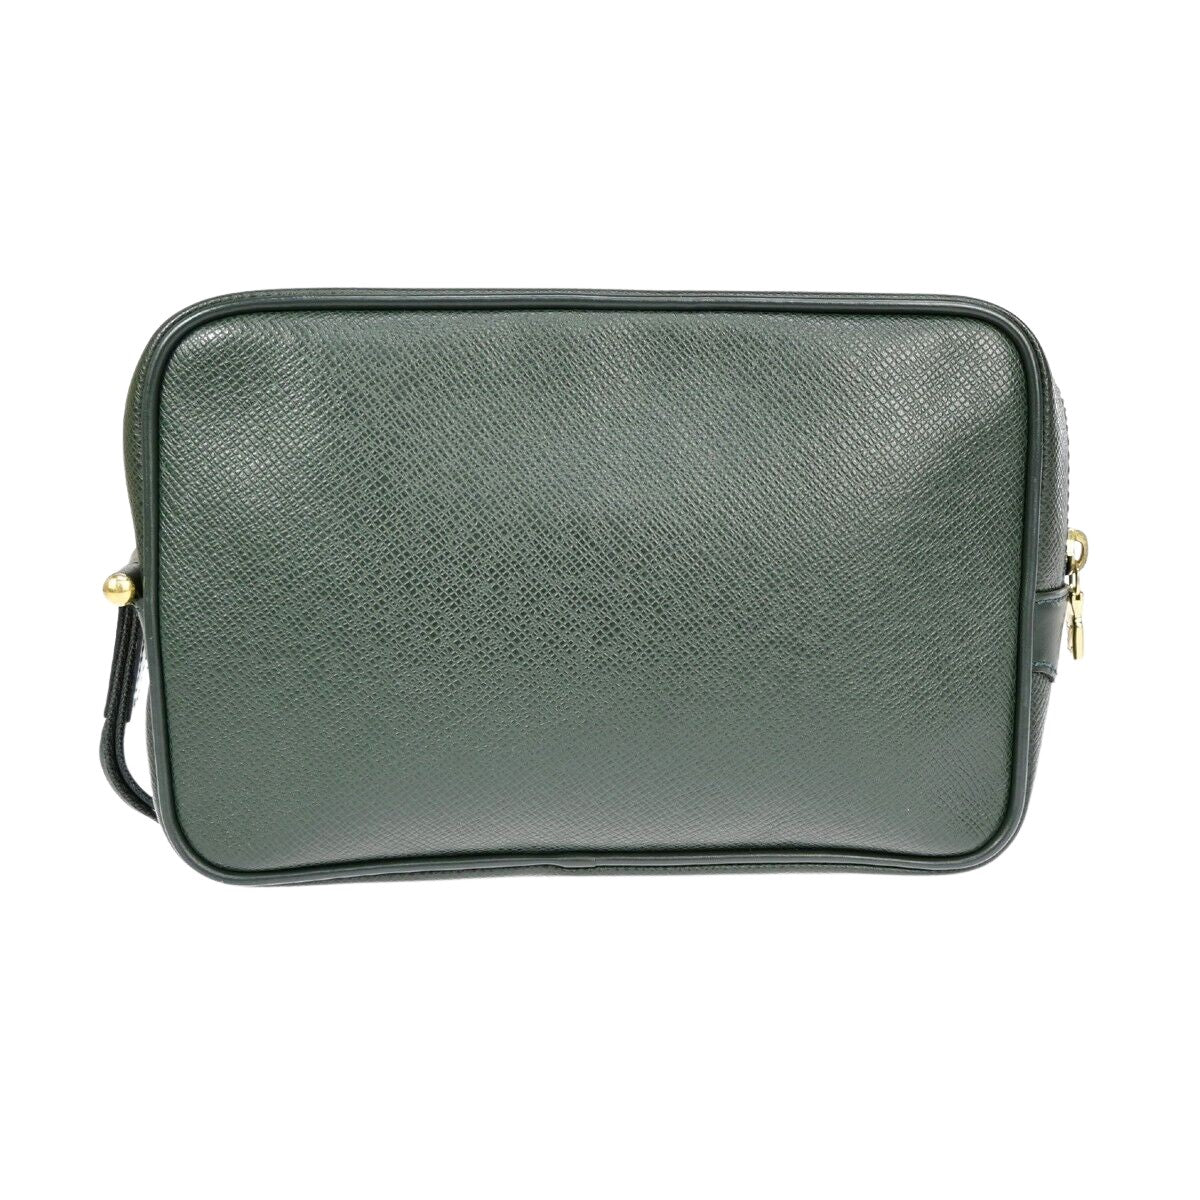 Louis Vuitton Unisex Green Leather Hand Clutch with Zip Pocket in Green